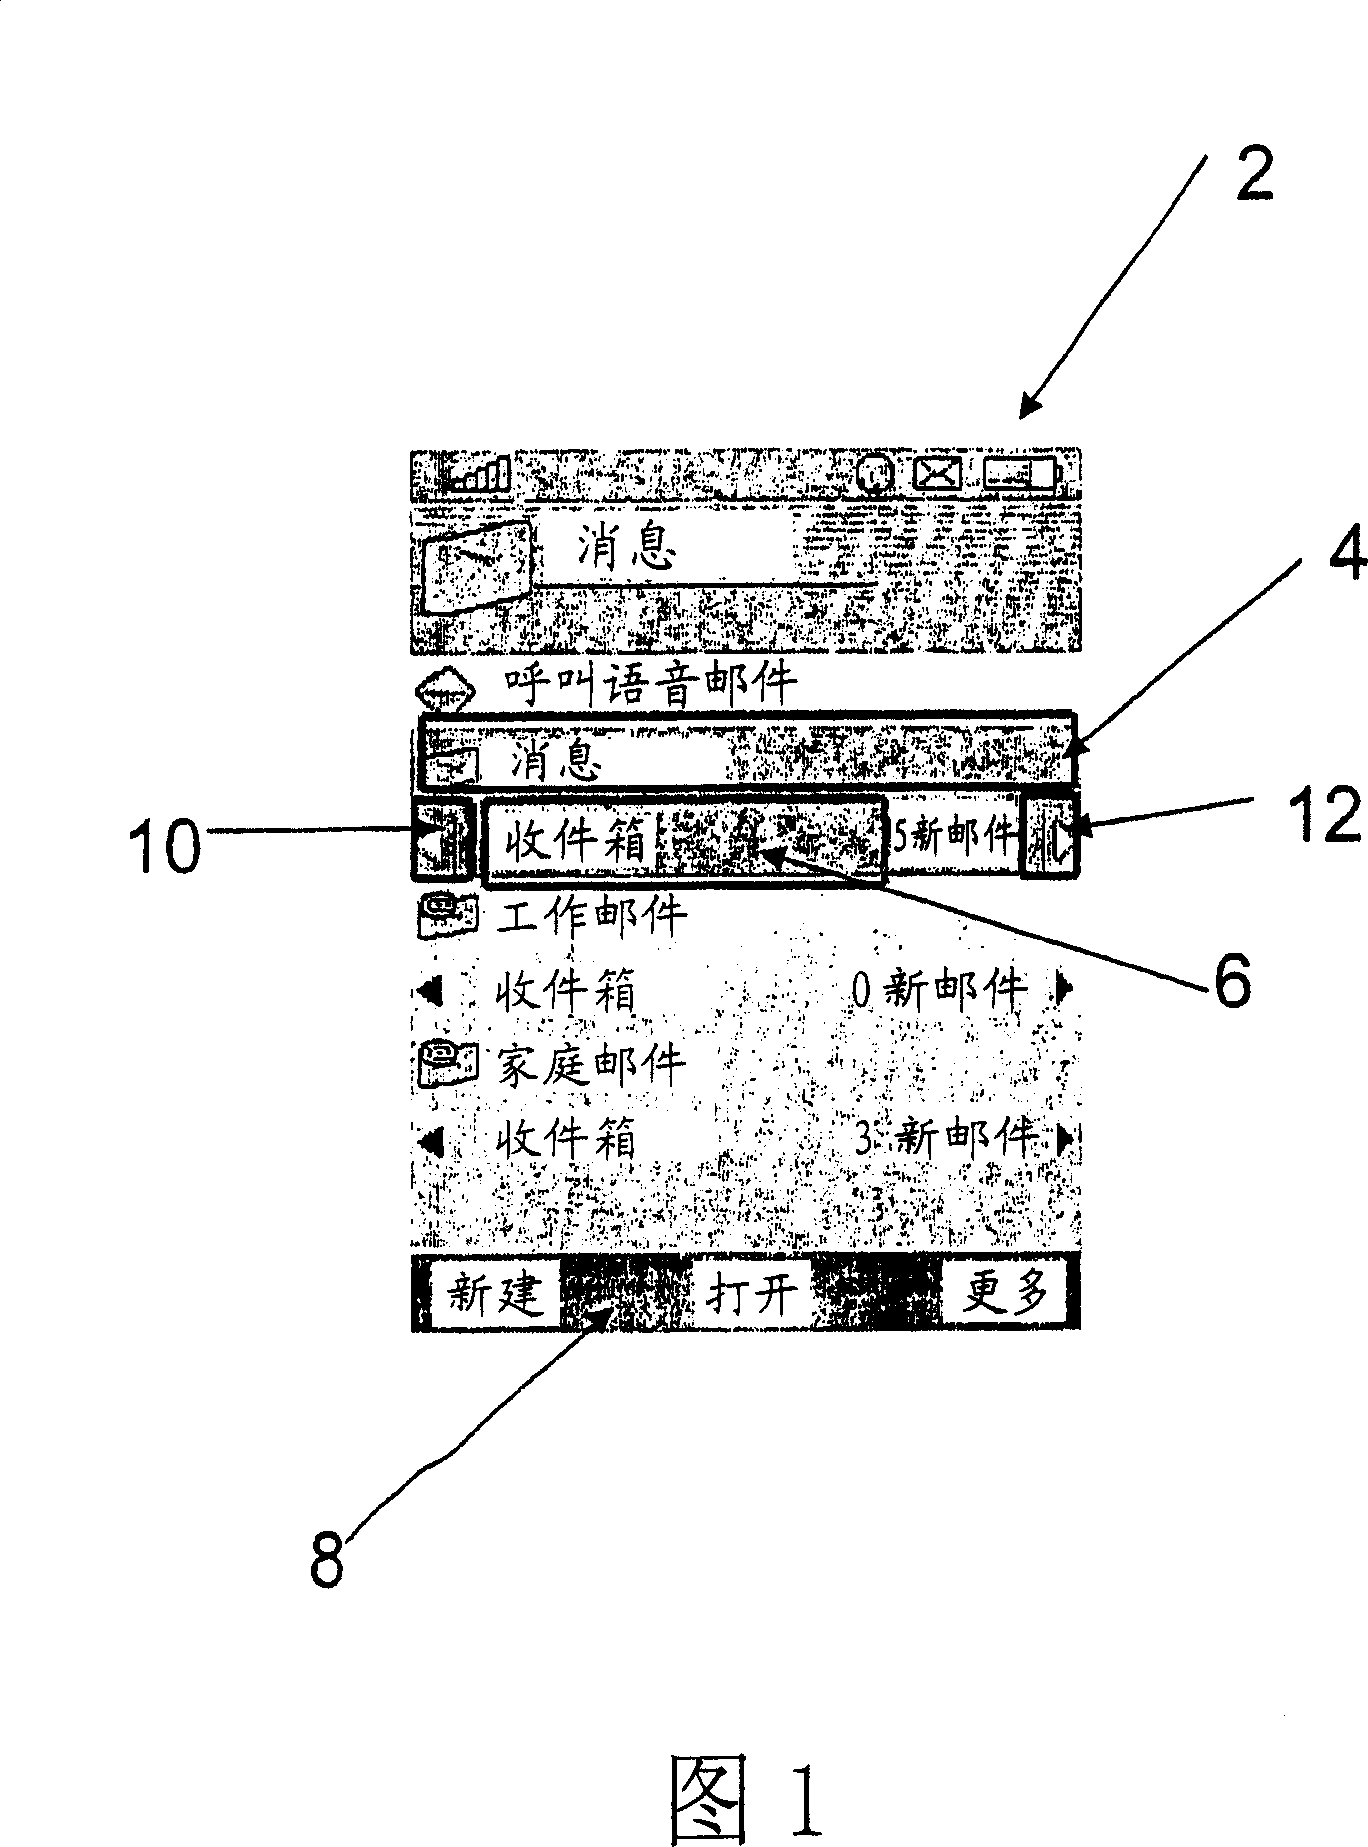 Displaying information in an interactive computing device